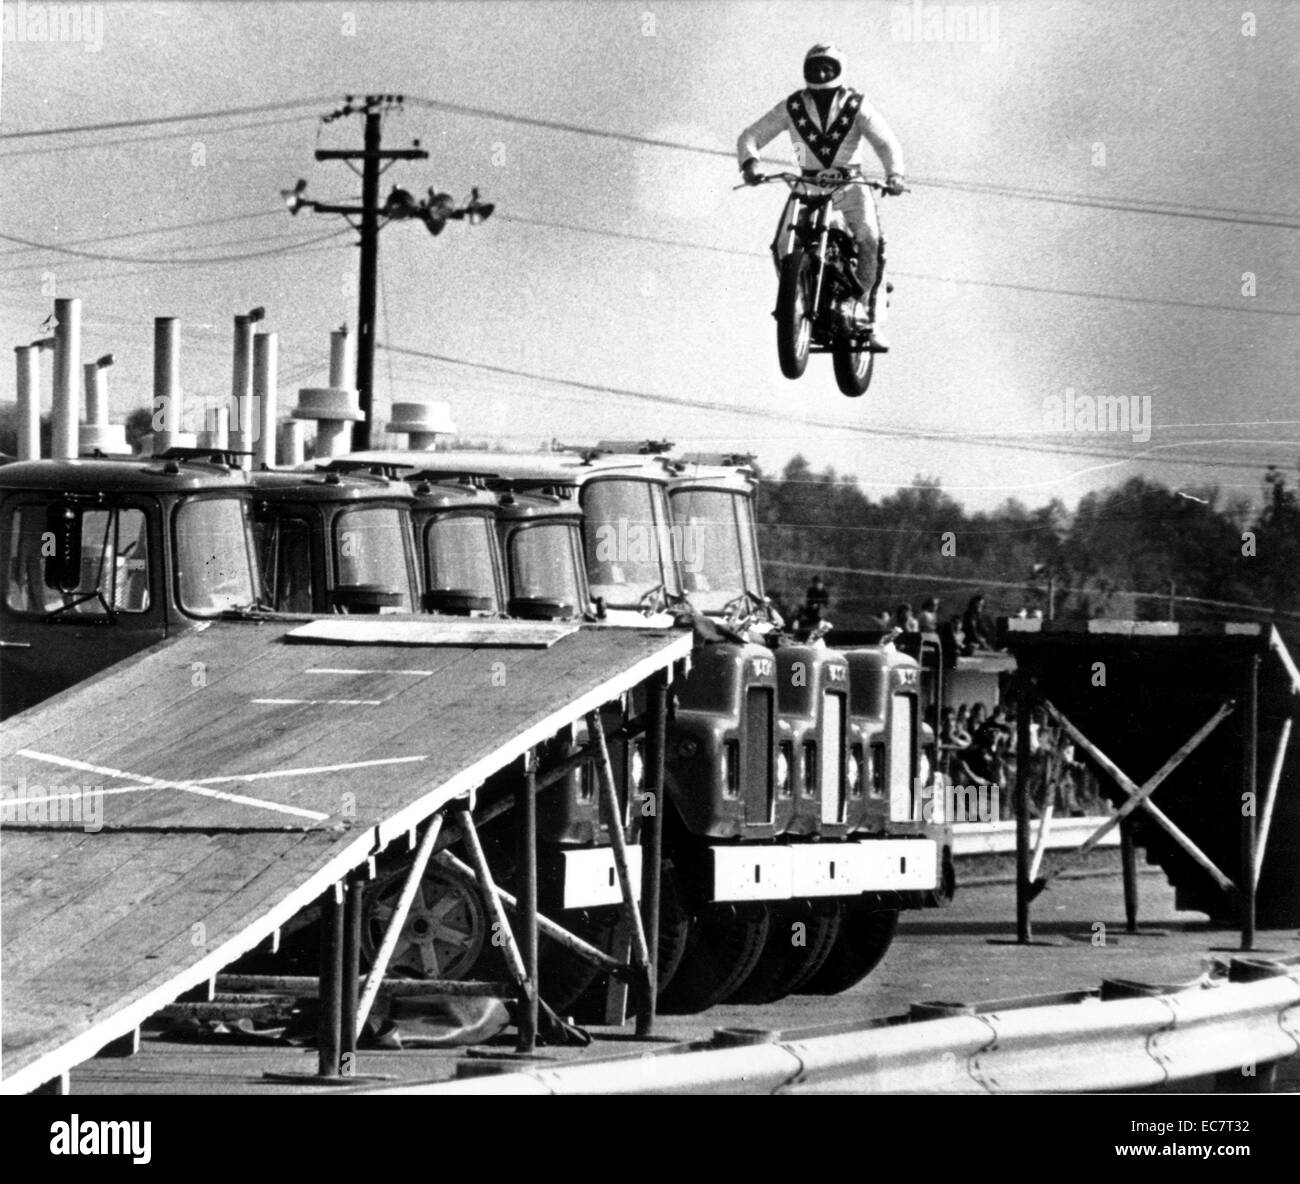 Evel Knievel was an American daredevil, painter, entertainer, and international icon. In his career he attempted over 75 ramp-to-ramp motorcycle jumps between 1965 and 1980, and in 1974, a failed jump across Snake River Canyon in the Skycycle X-2, a steam-powered rocket. The over 433 broken bones he suffered during his career earned him an entry in the Guinness Book of World Records as the survivor of 'most bones broken in a lifetime' Stock Photo